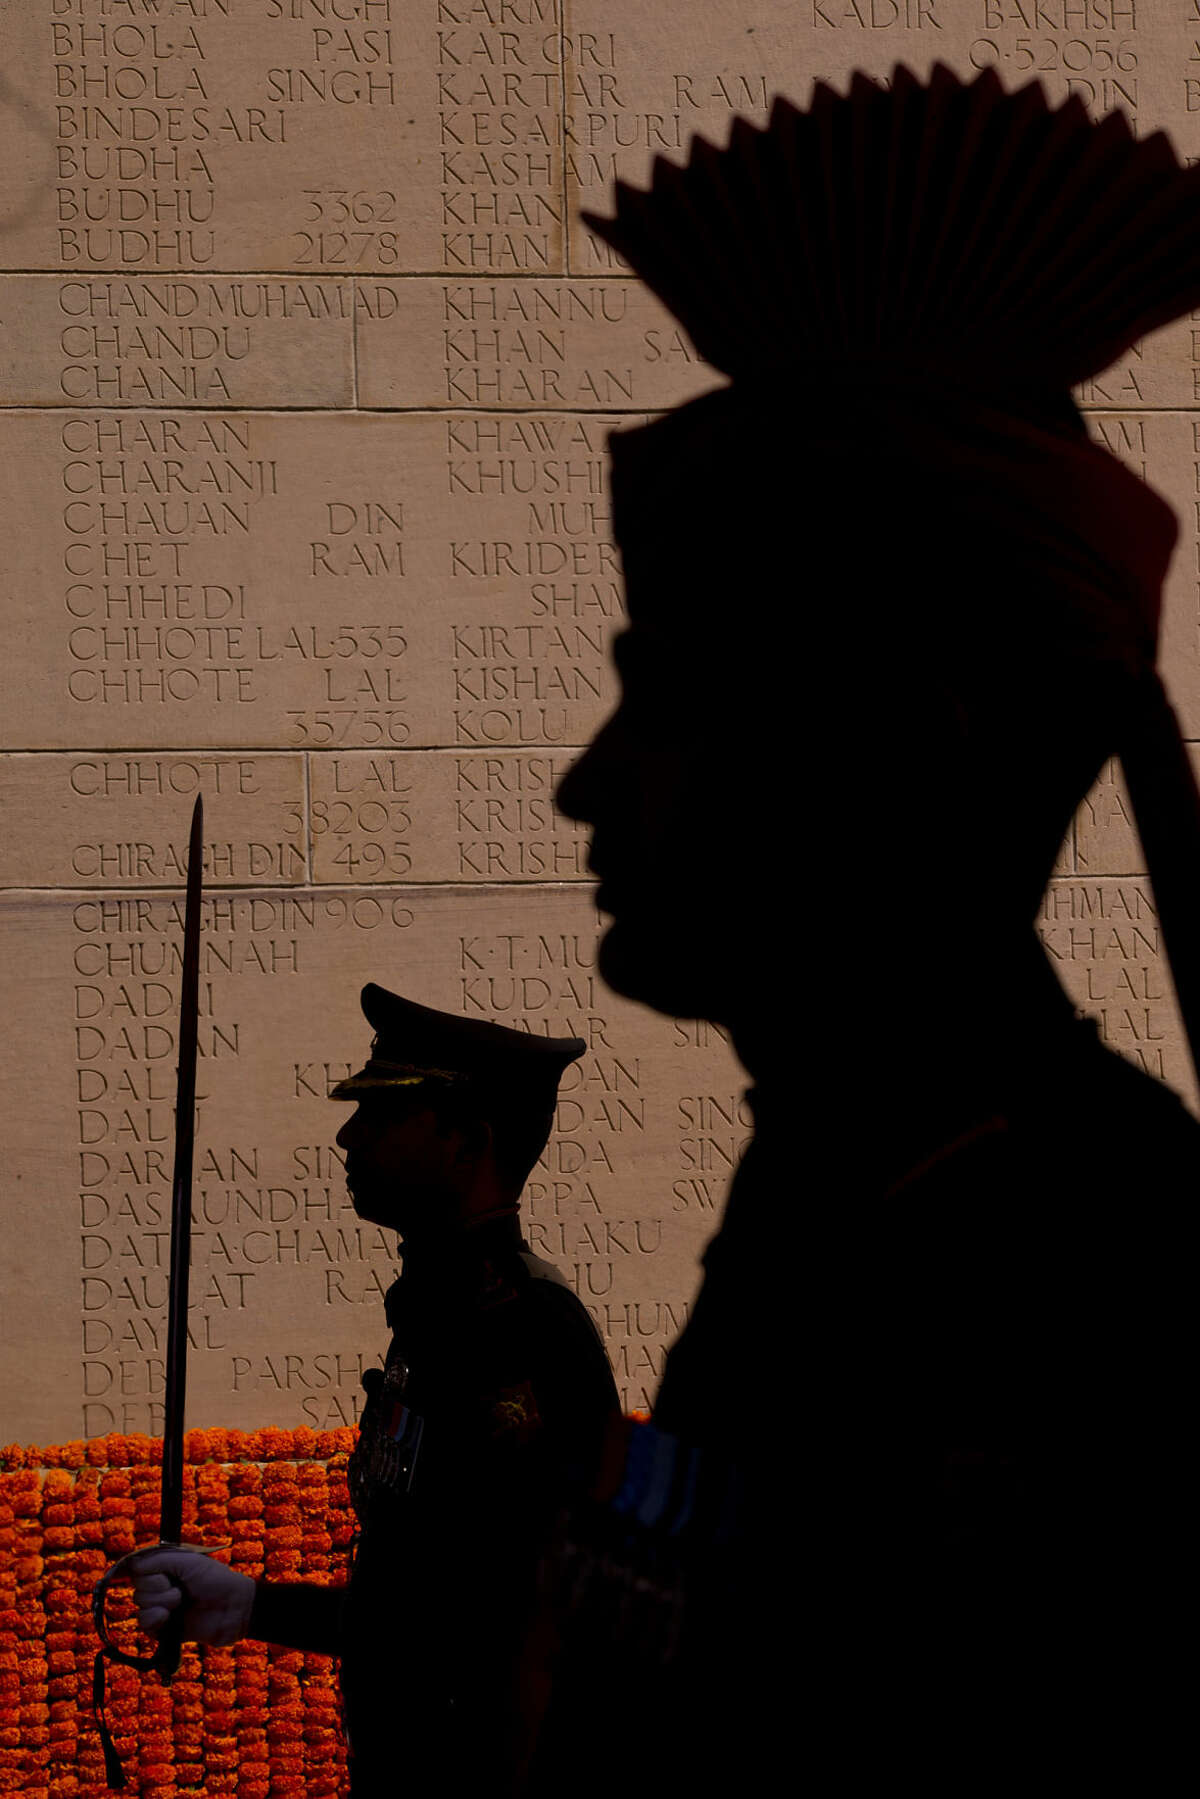 Indian soldiers pay homage as they stand near names of soldiers inscribed on the wall at the India Gate war memorial, in New Delhi, India, Monday, March 9, 2015. The Indian Army will organize a series of events beginning Monday to commemorate the valor and sacrifice of Indian soldiers who fought in the First World War. (AP Photo/Saurabh Das)